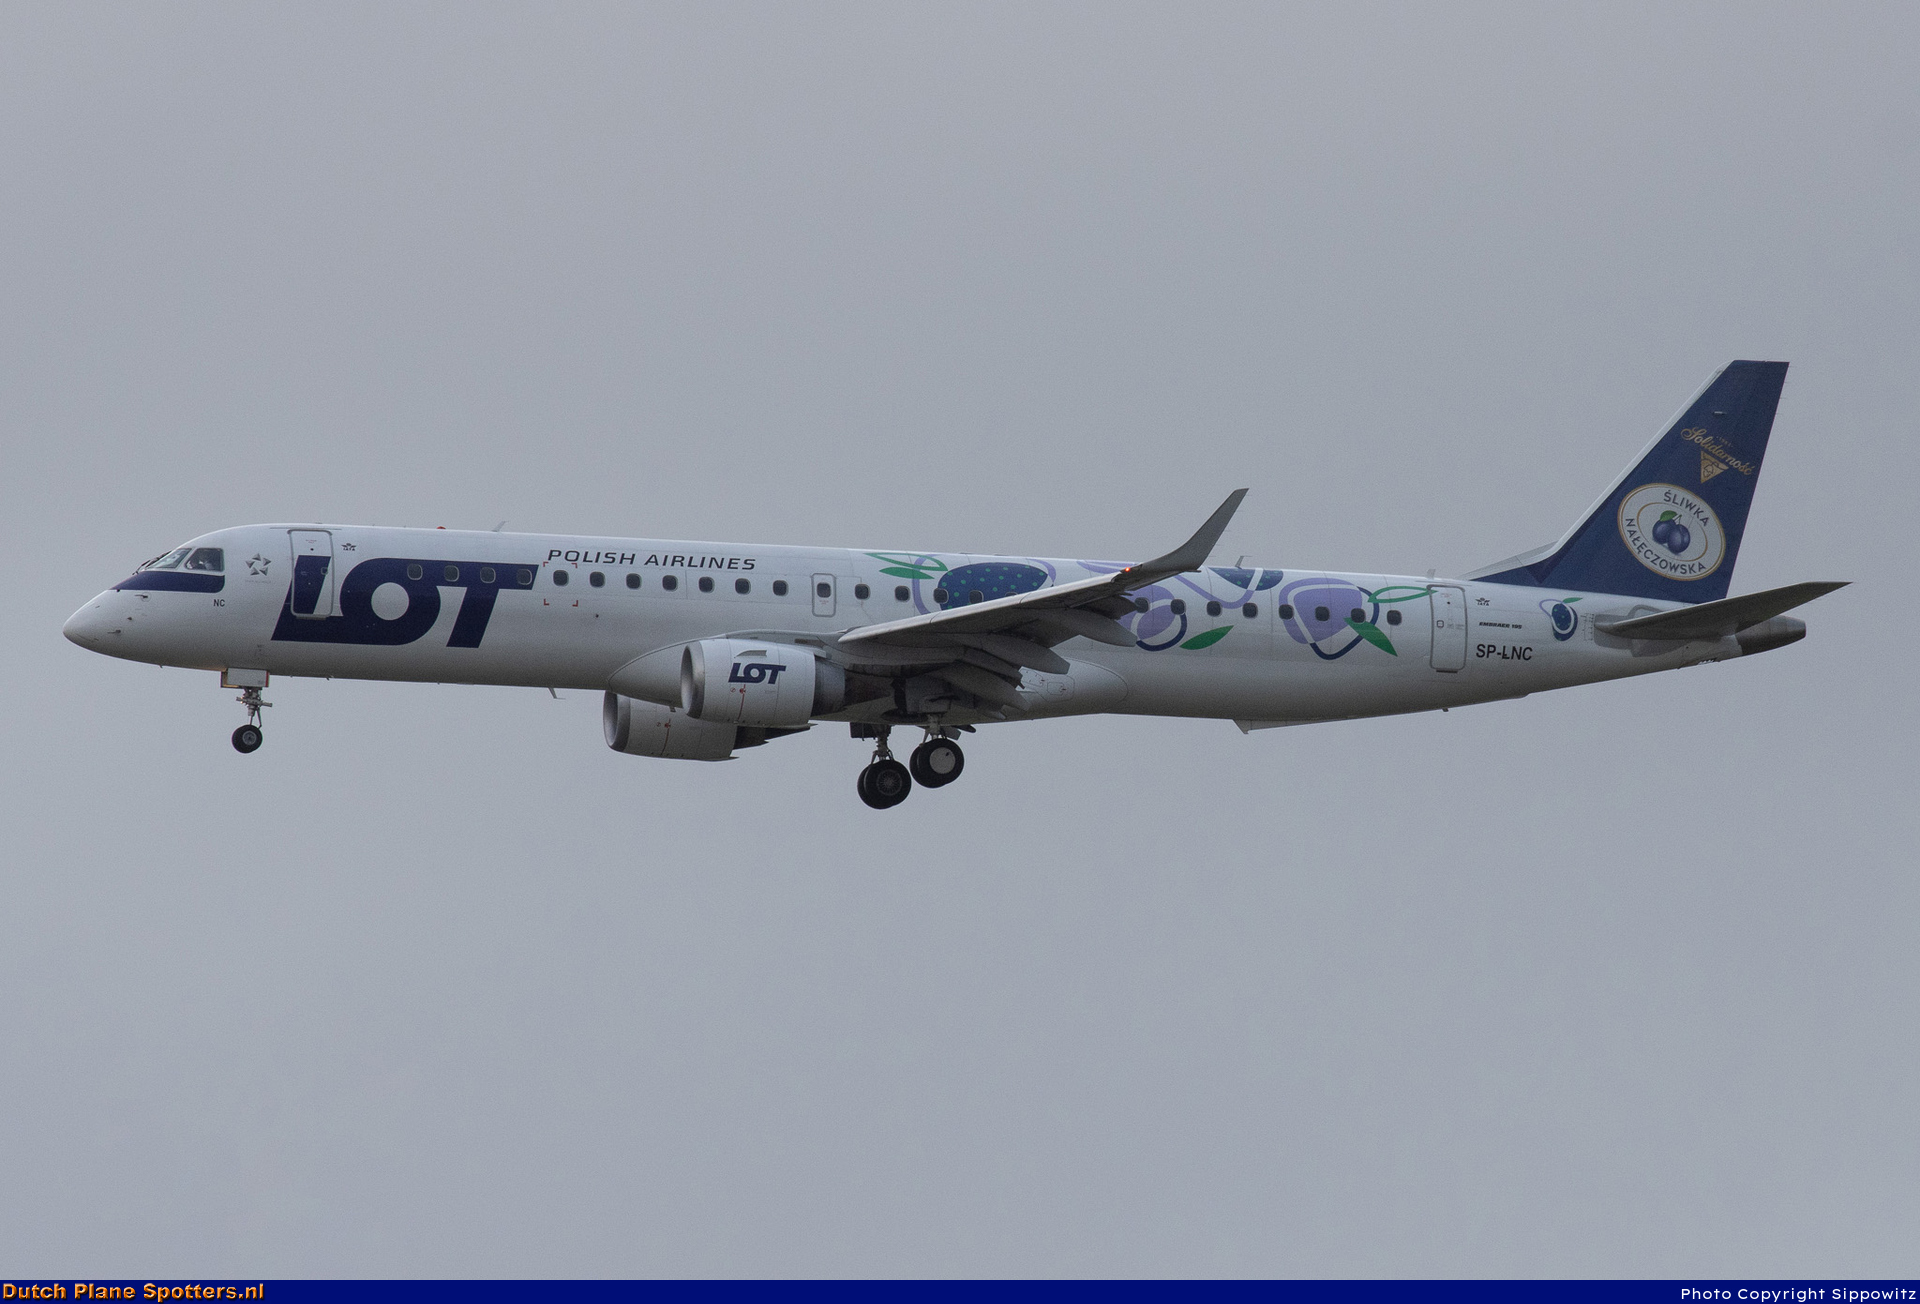 SP-LNC Embraer 195 LOT Polish Airlines by Sippowitz